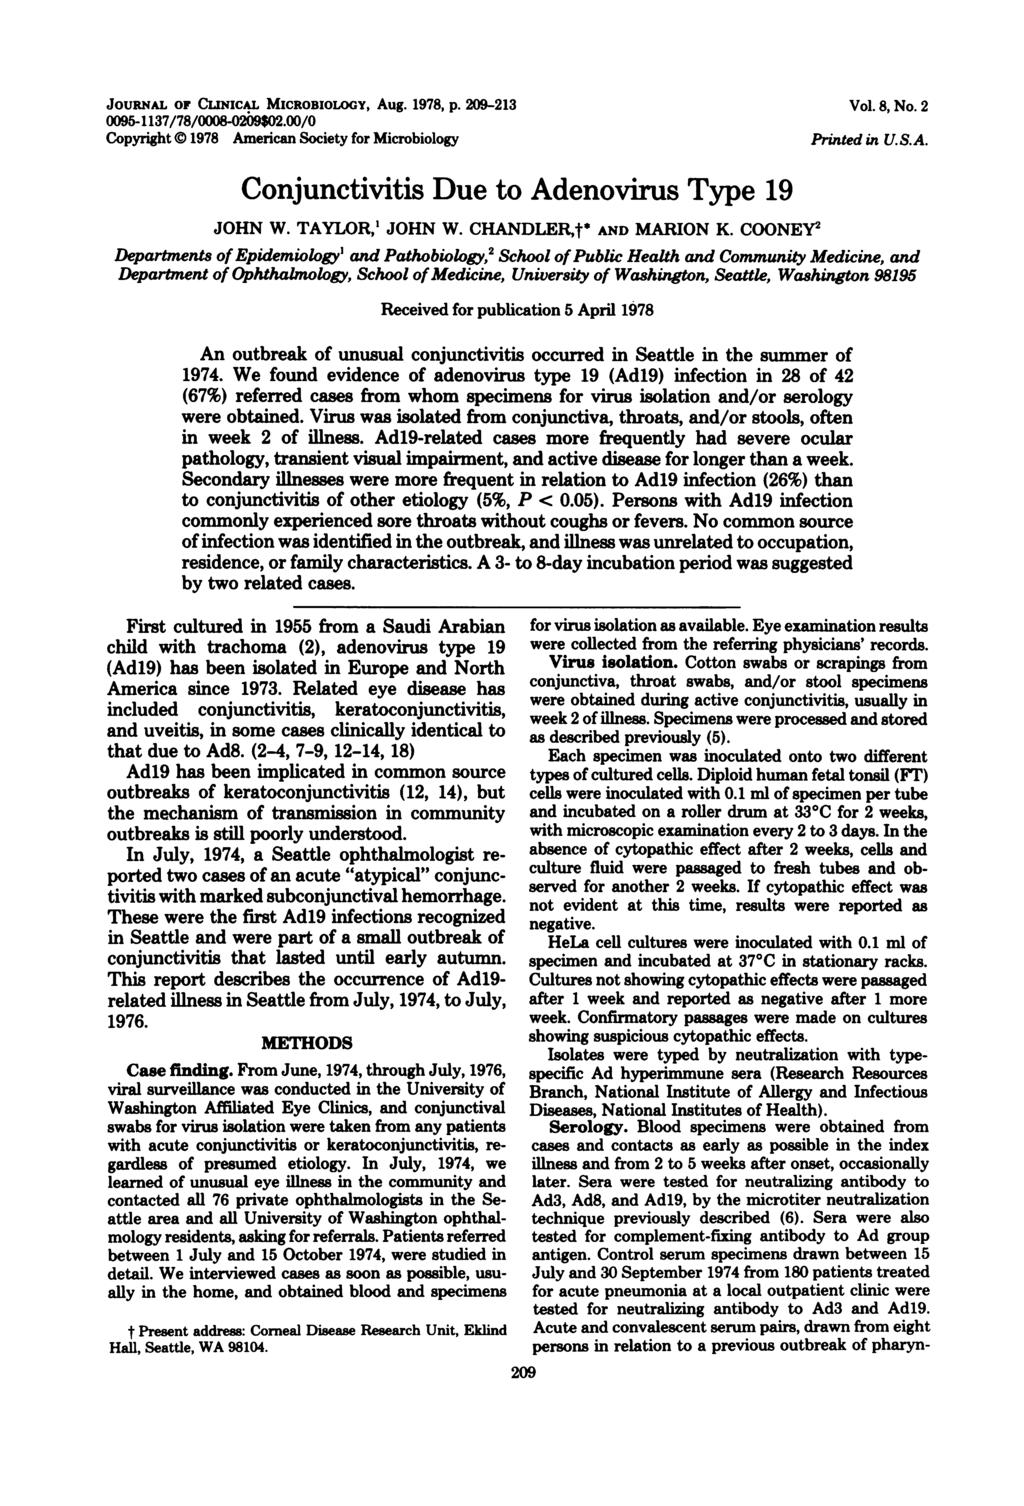 JOURNAL OF CLINICAL MICROBIOLOGY, Aug. 1978, p. 209-213 0095-1137/78/0008-0209$02.00/0 Copyright 1978 American Society for Microbiology Conjunctivitis Due to Adenovirus Type 19 Vol. 8, No.